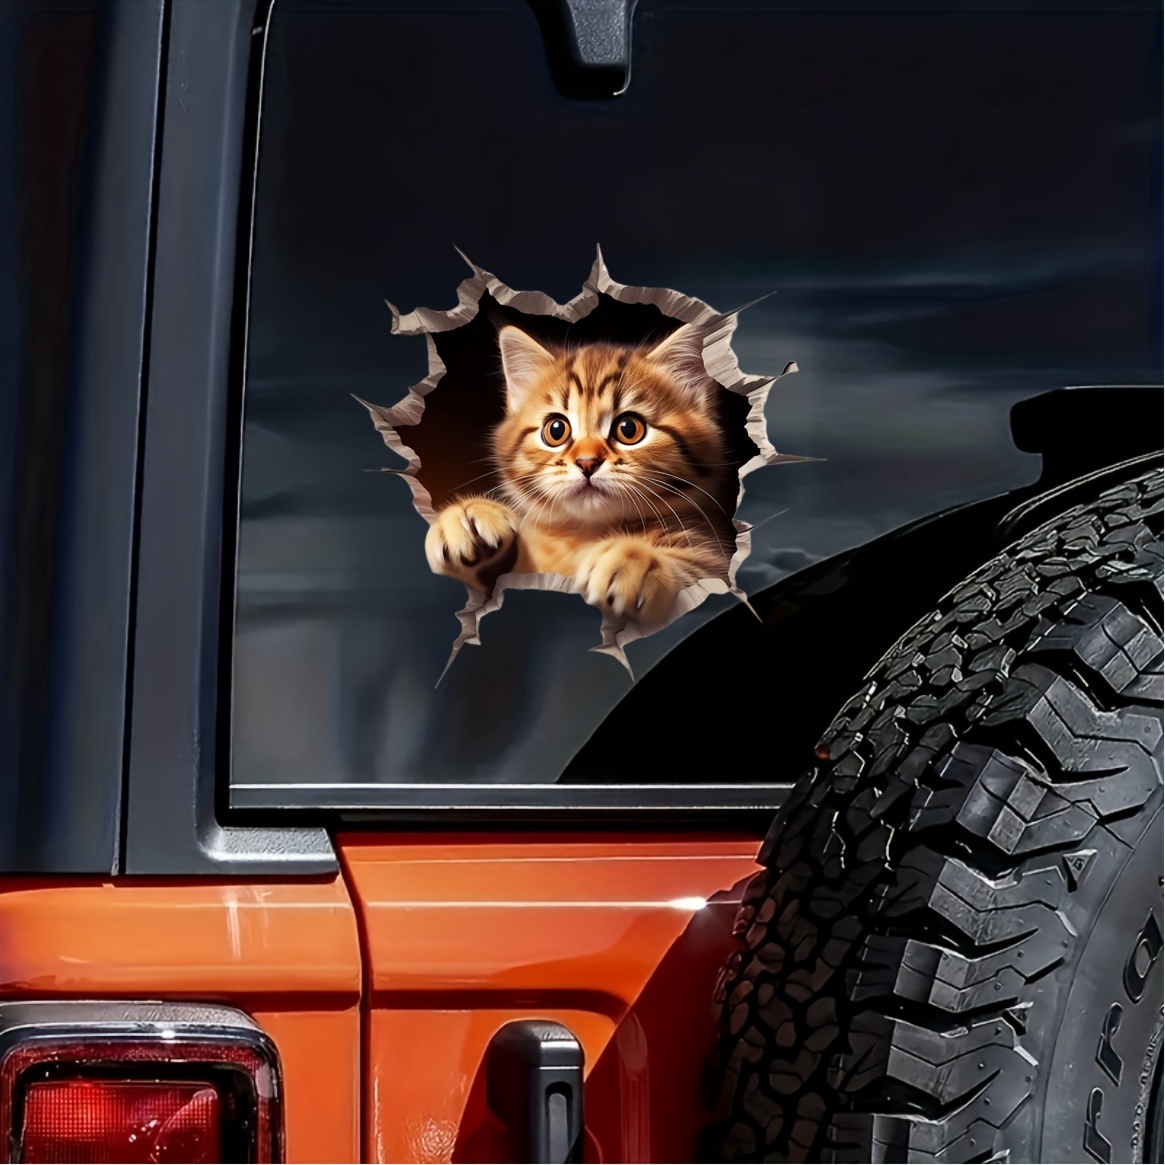 

3d Cat Vinyl Stickers For Cars, Trucks, Suvs, , Windows, Bumpers, Walls, Laptops, Tablets, Cups, Flippers, And Any Smooth Surface